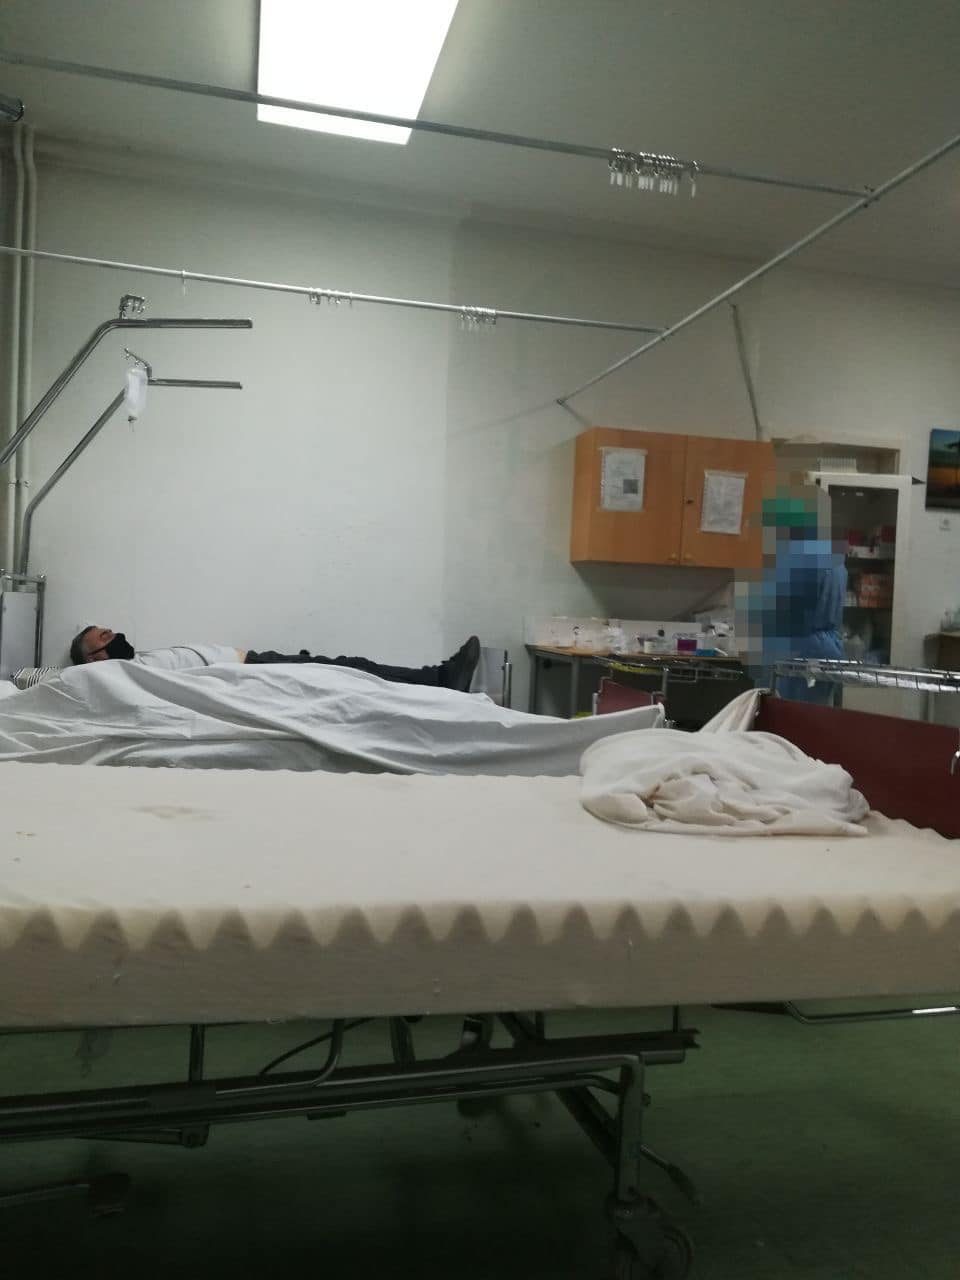 Deceased patients lie for hours next alive patients, Zaev and Filipce must be held criminally accountable